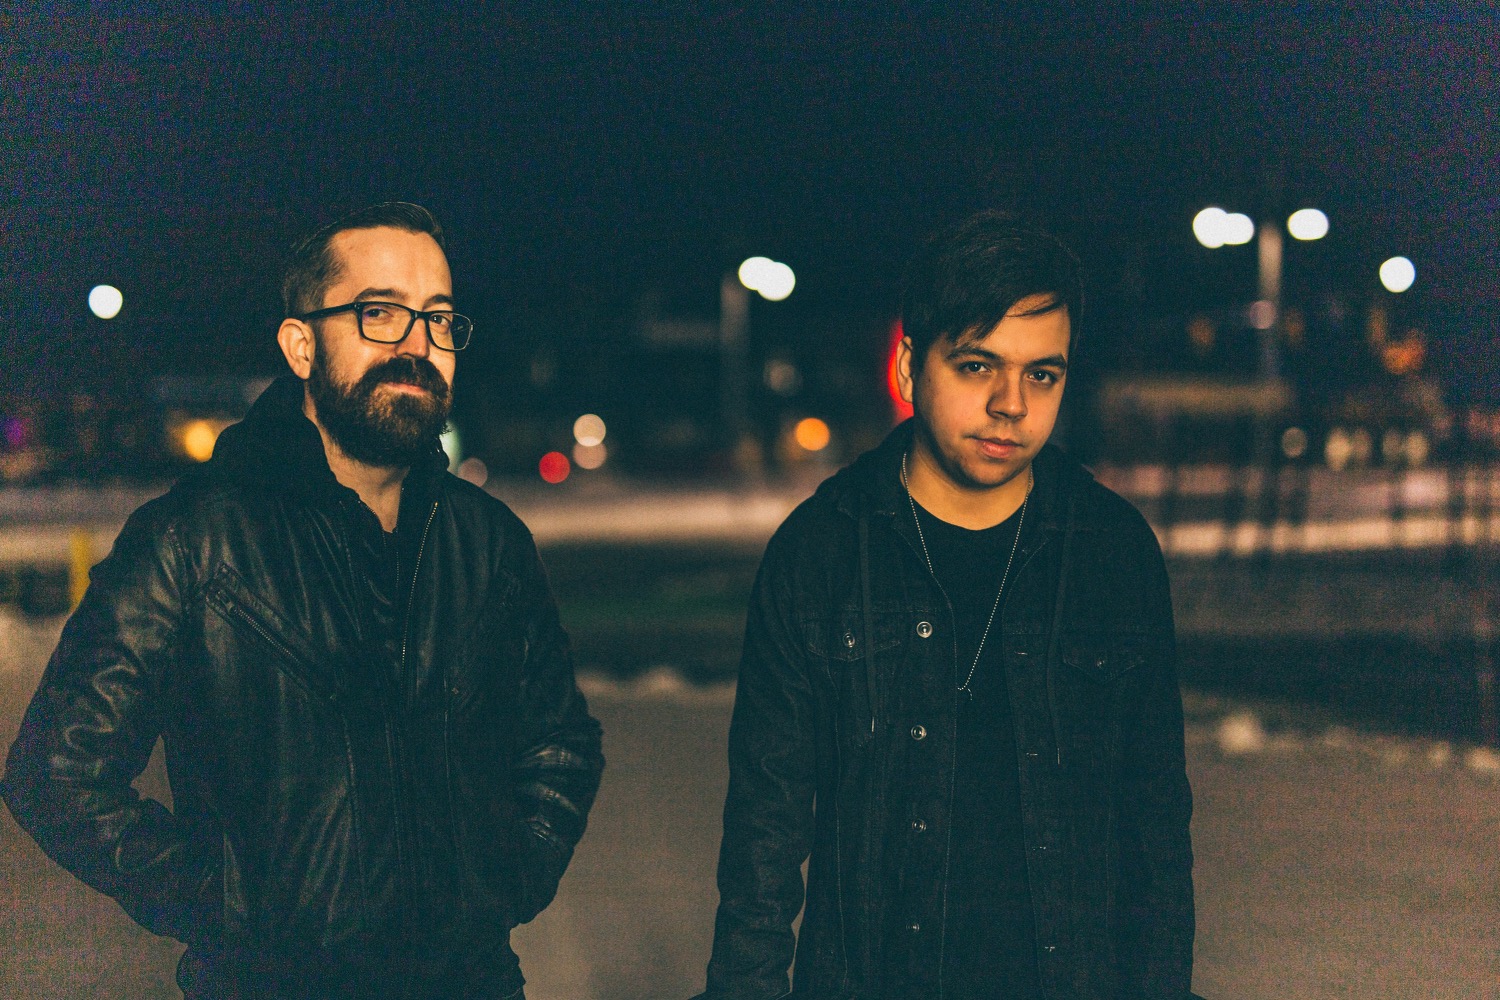 NEW SIGNING: Losers Club Signs with Substream Records